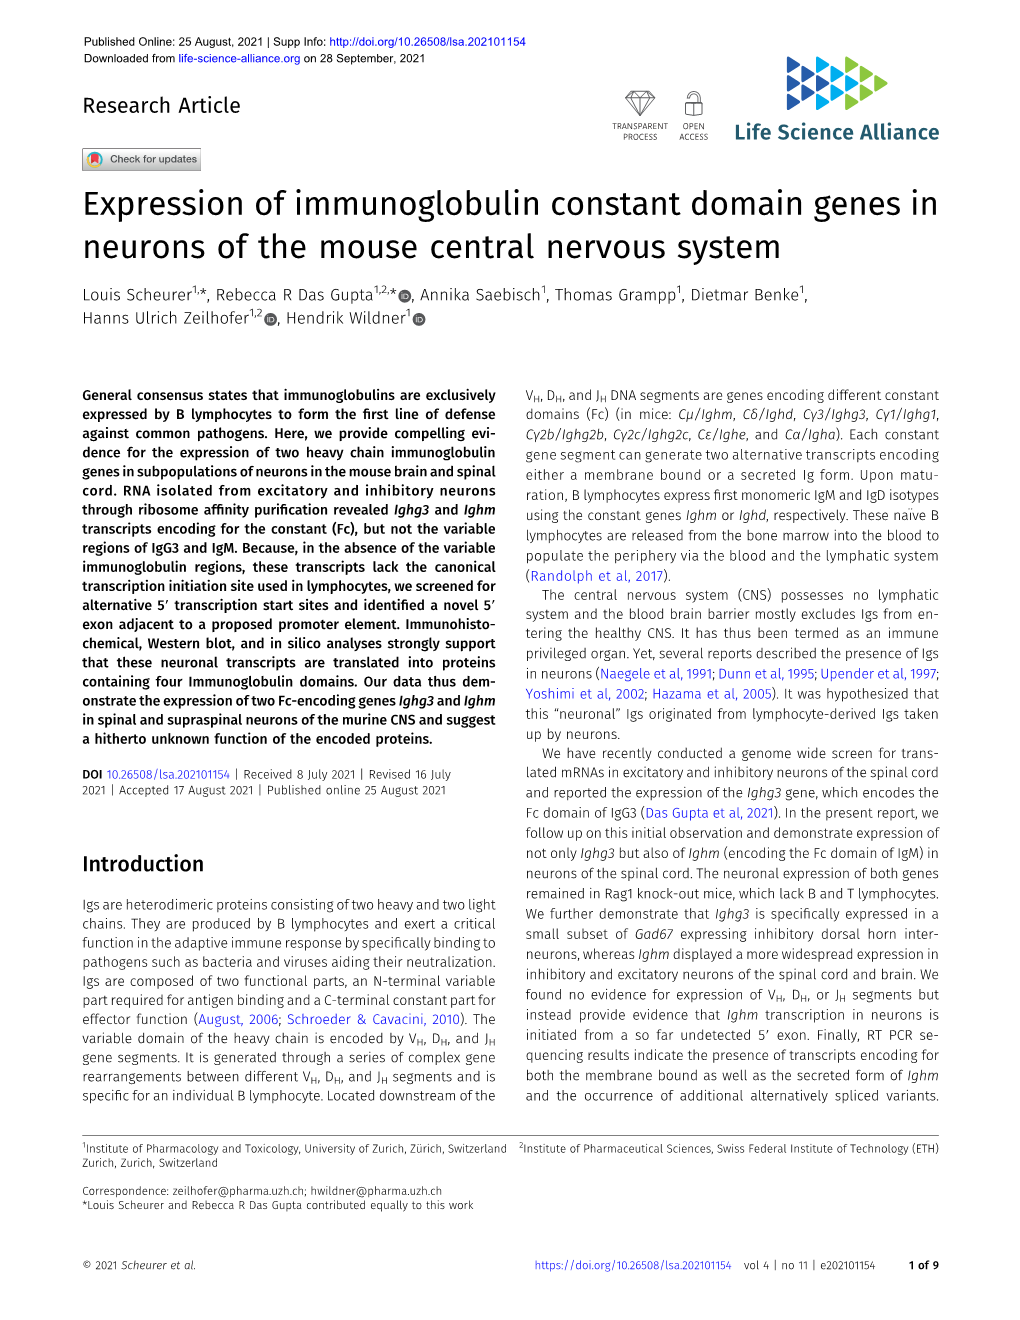 Expression of Immunoglobulin Constant Domain Genes in Neurons of the Mouse Central Nervous System